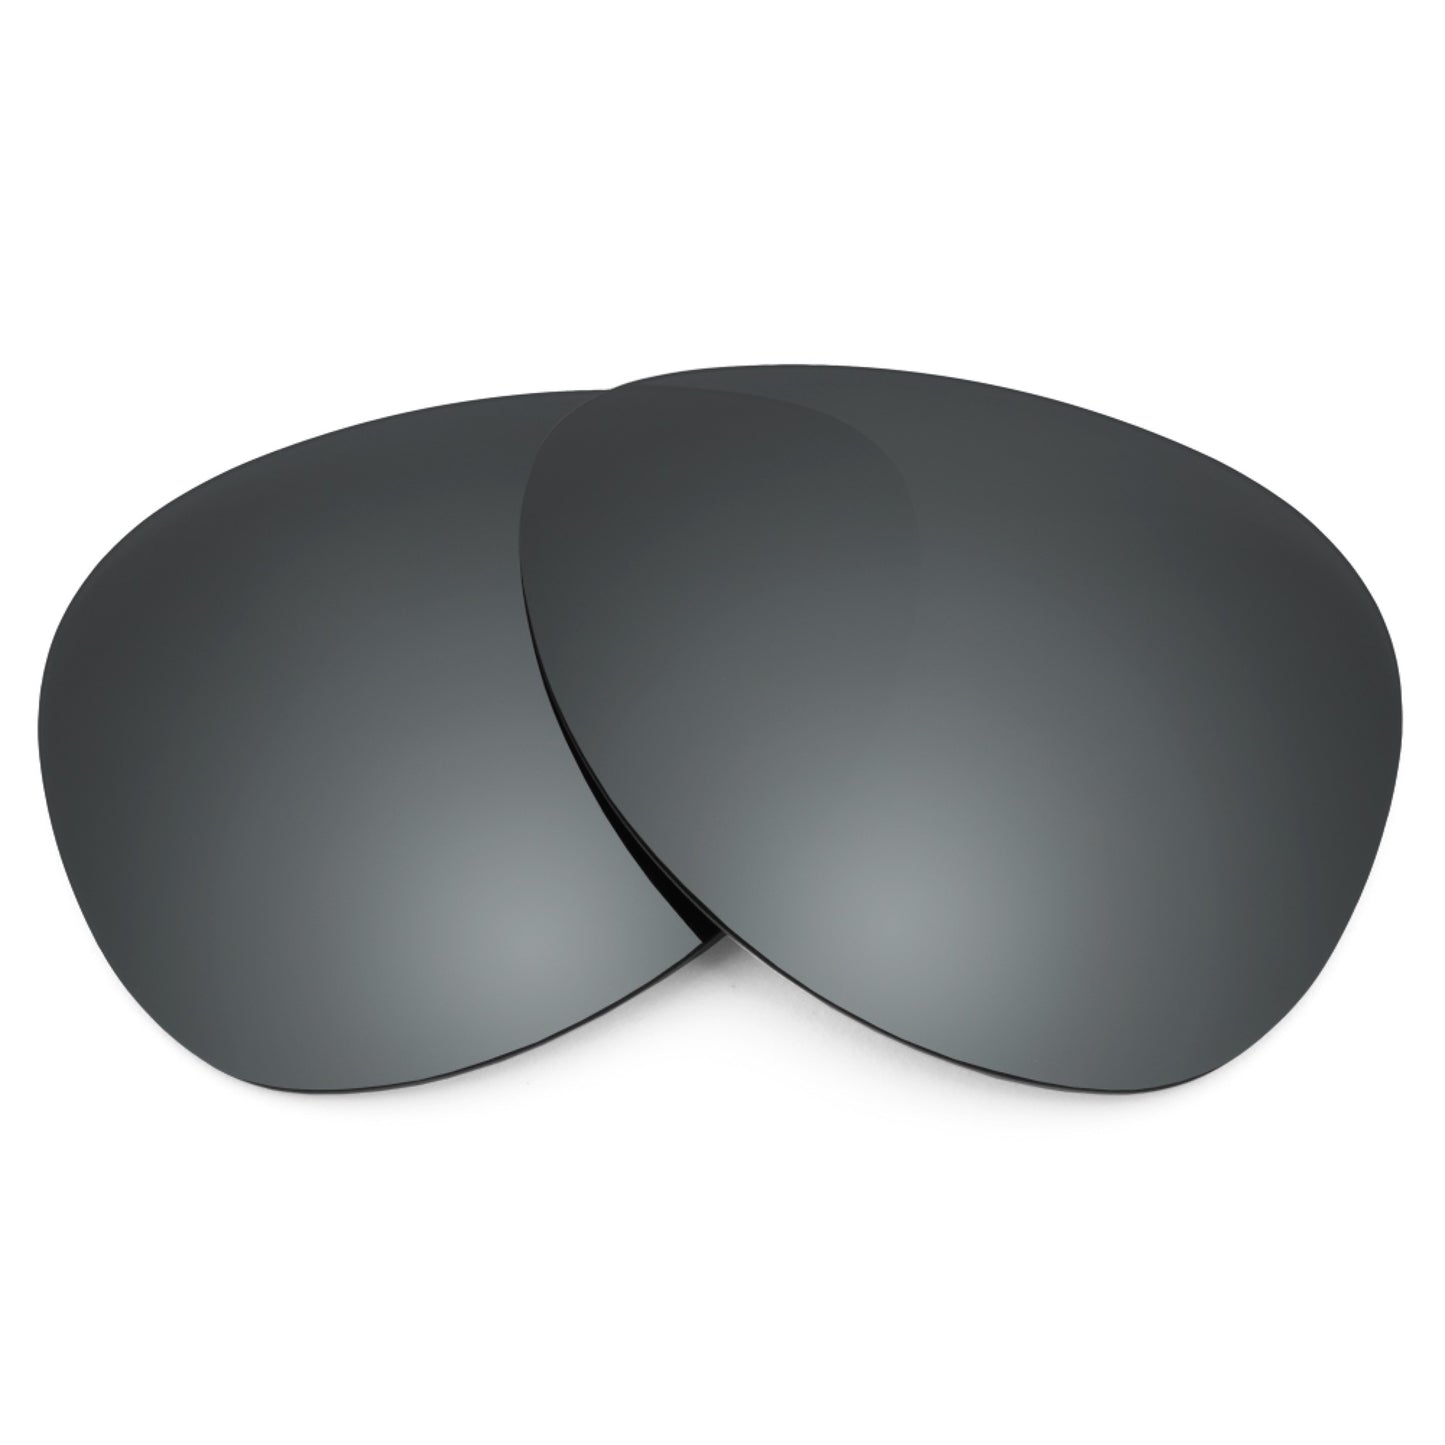 Revant replacement lenses for Ray-Ban Aviator RB3025 58mm Non-Polarized Black Chrome